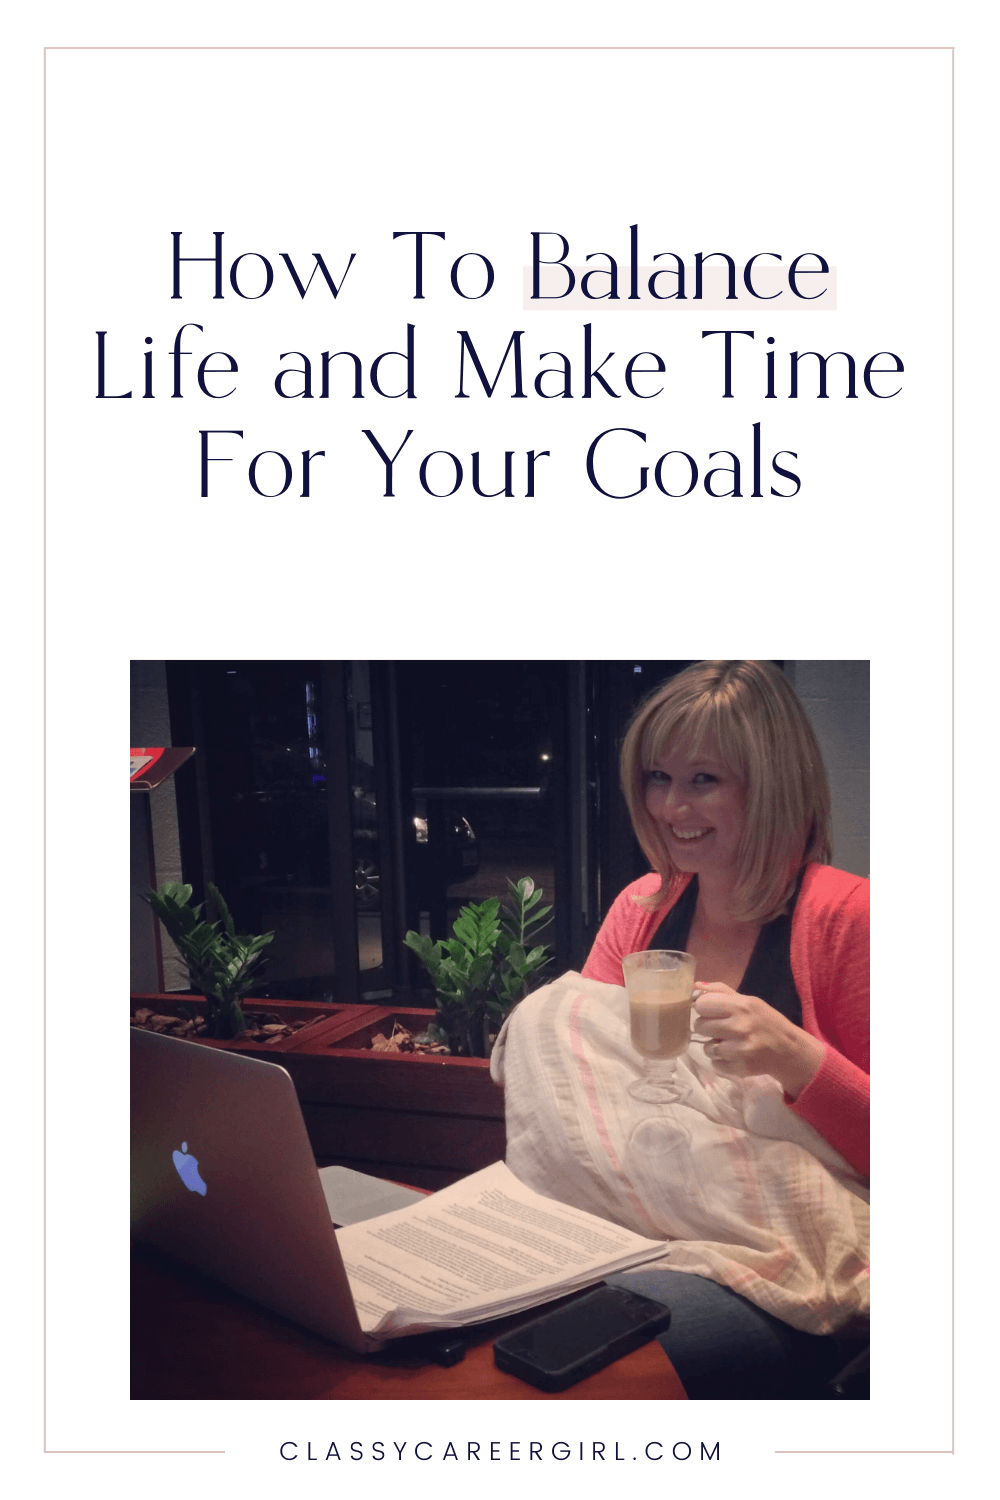 How To Balance Life and Make Time For Your Goals